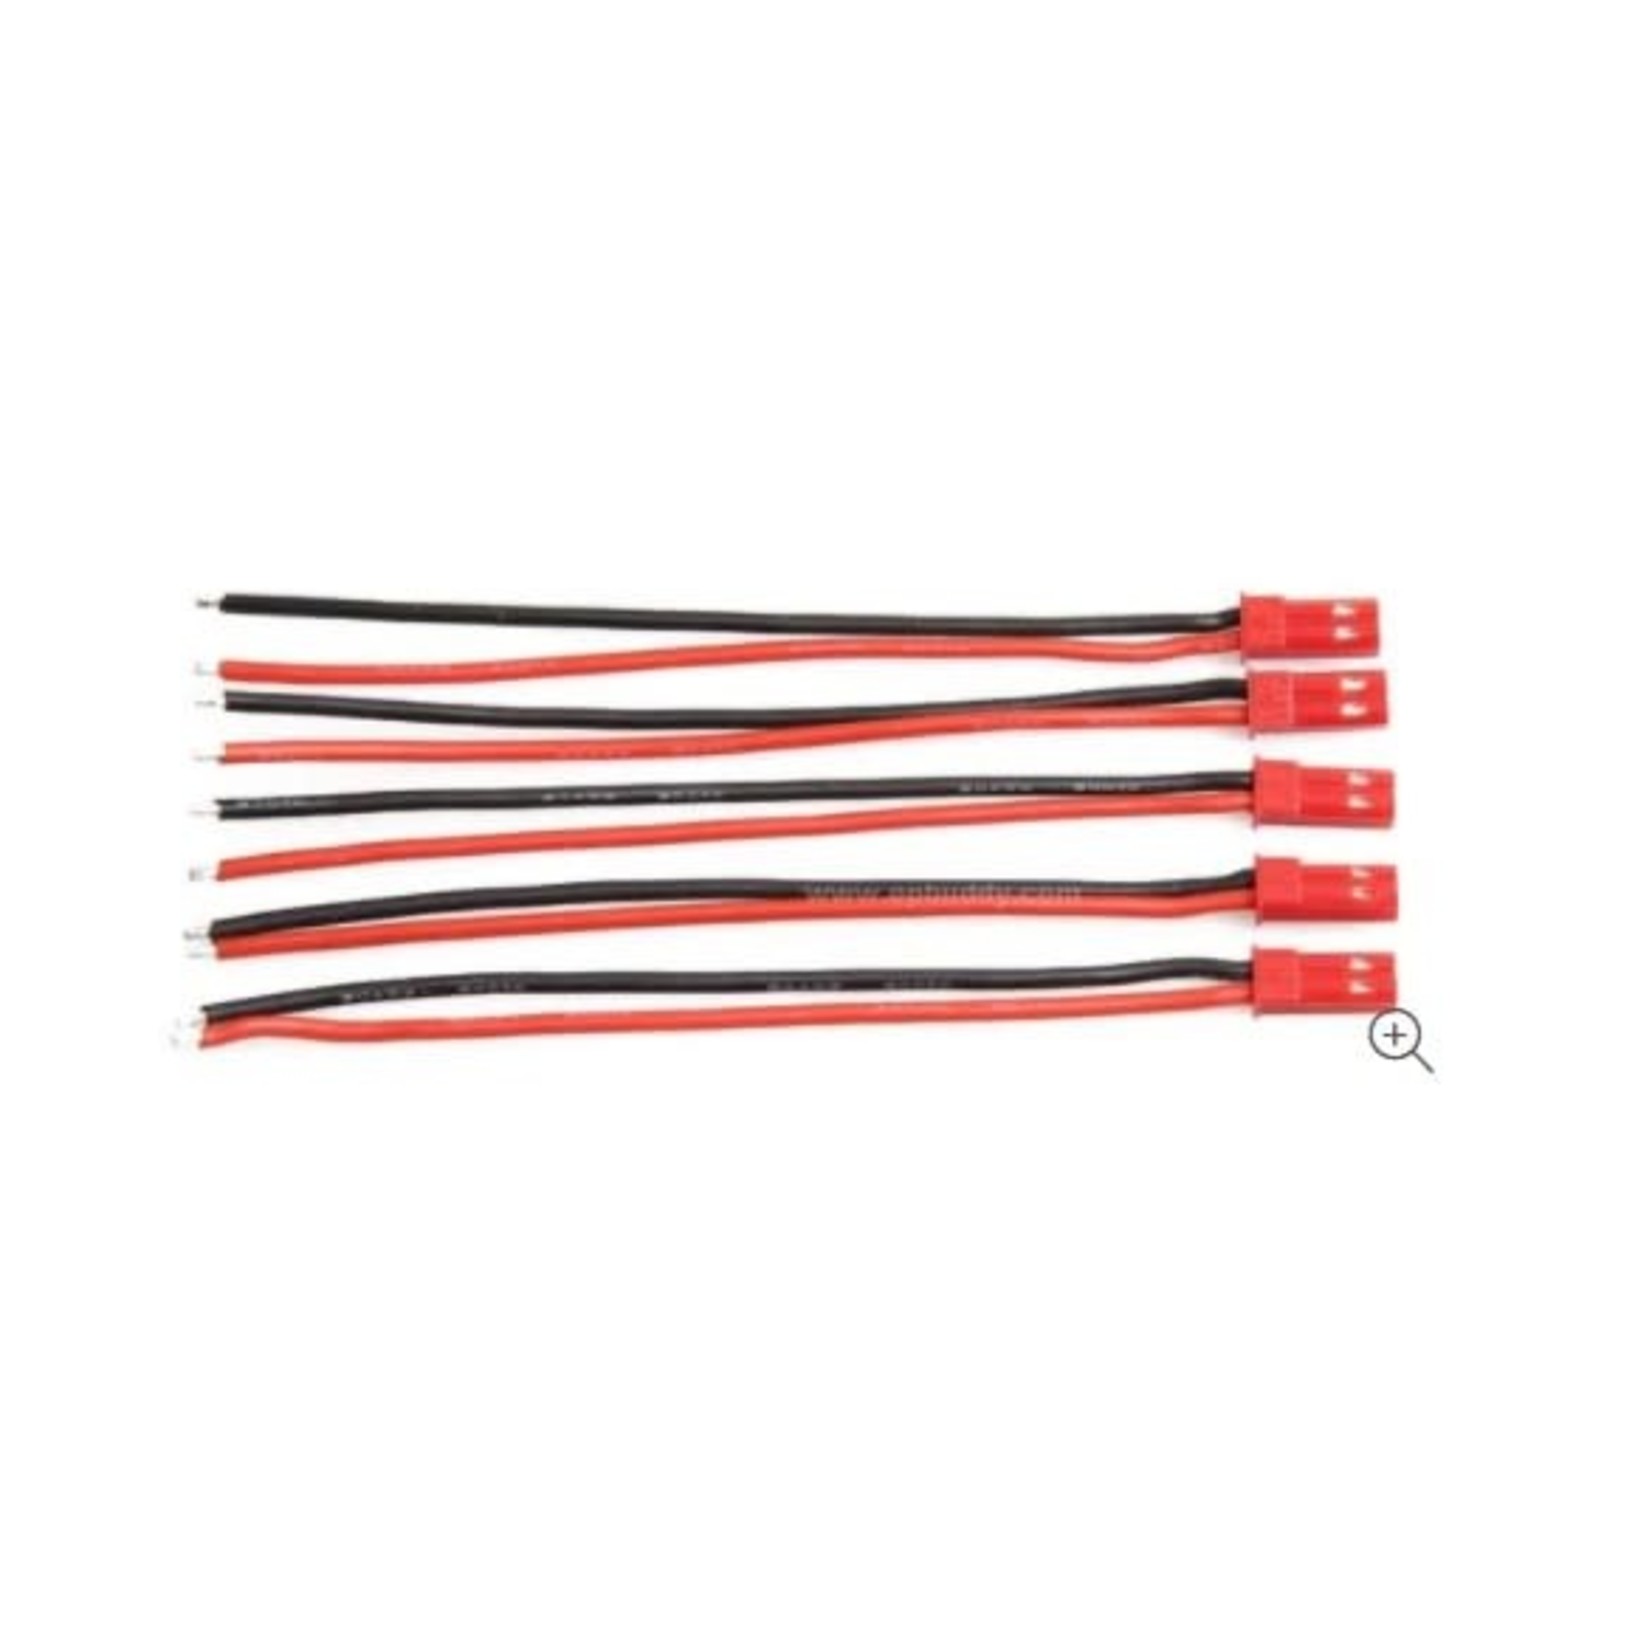 2U Hobby JST Pigtail Female Connectors for Battery 5 Pieces